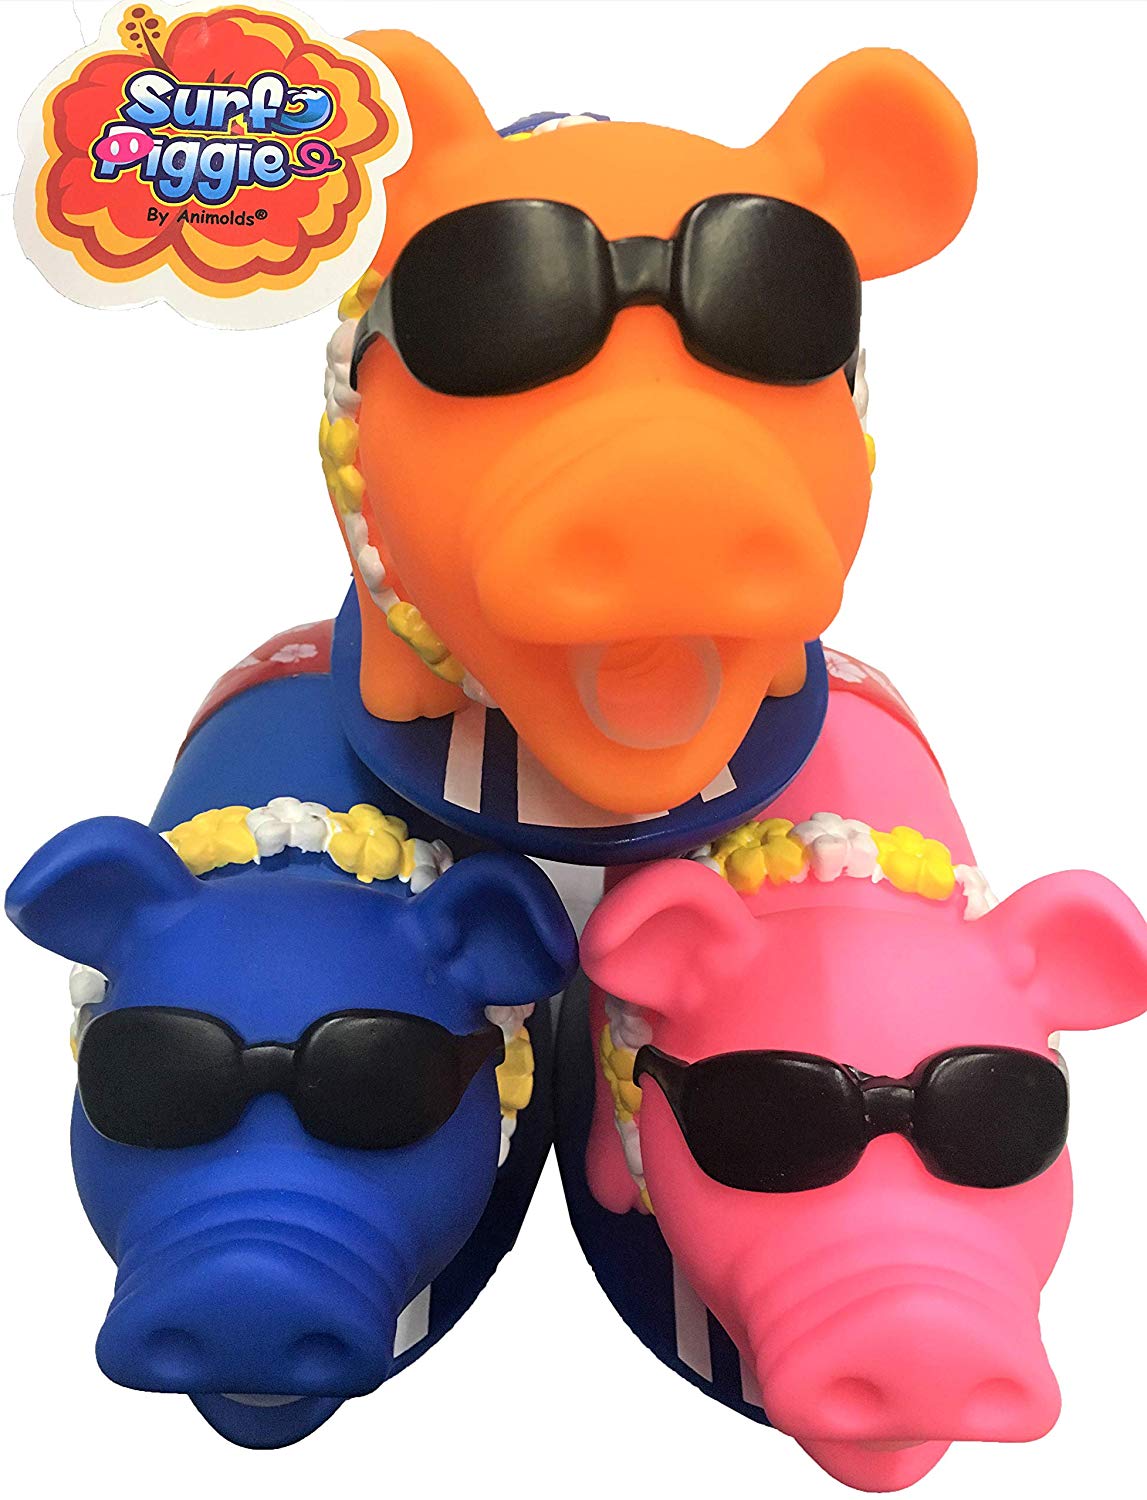 Surf Piggie The Surfing & Snorting Pig Stress Relief Squeeze Toy, Ideal Funny Novelty & Gag Gifts - The Perfect Sensory Toys for Kids or Prank Toy for The Office - By Animolds (12 Pack) - image 1 of 5